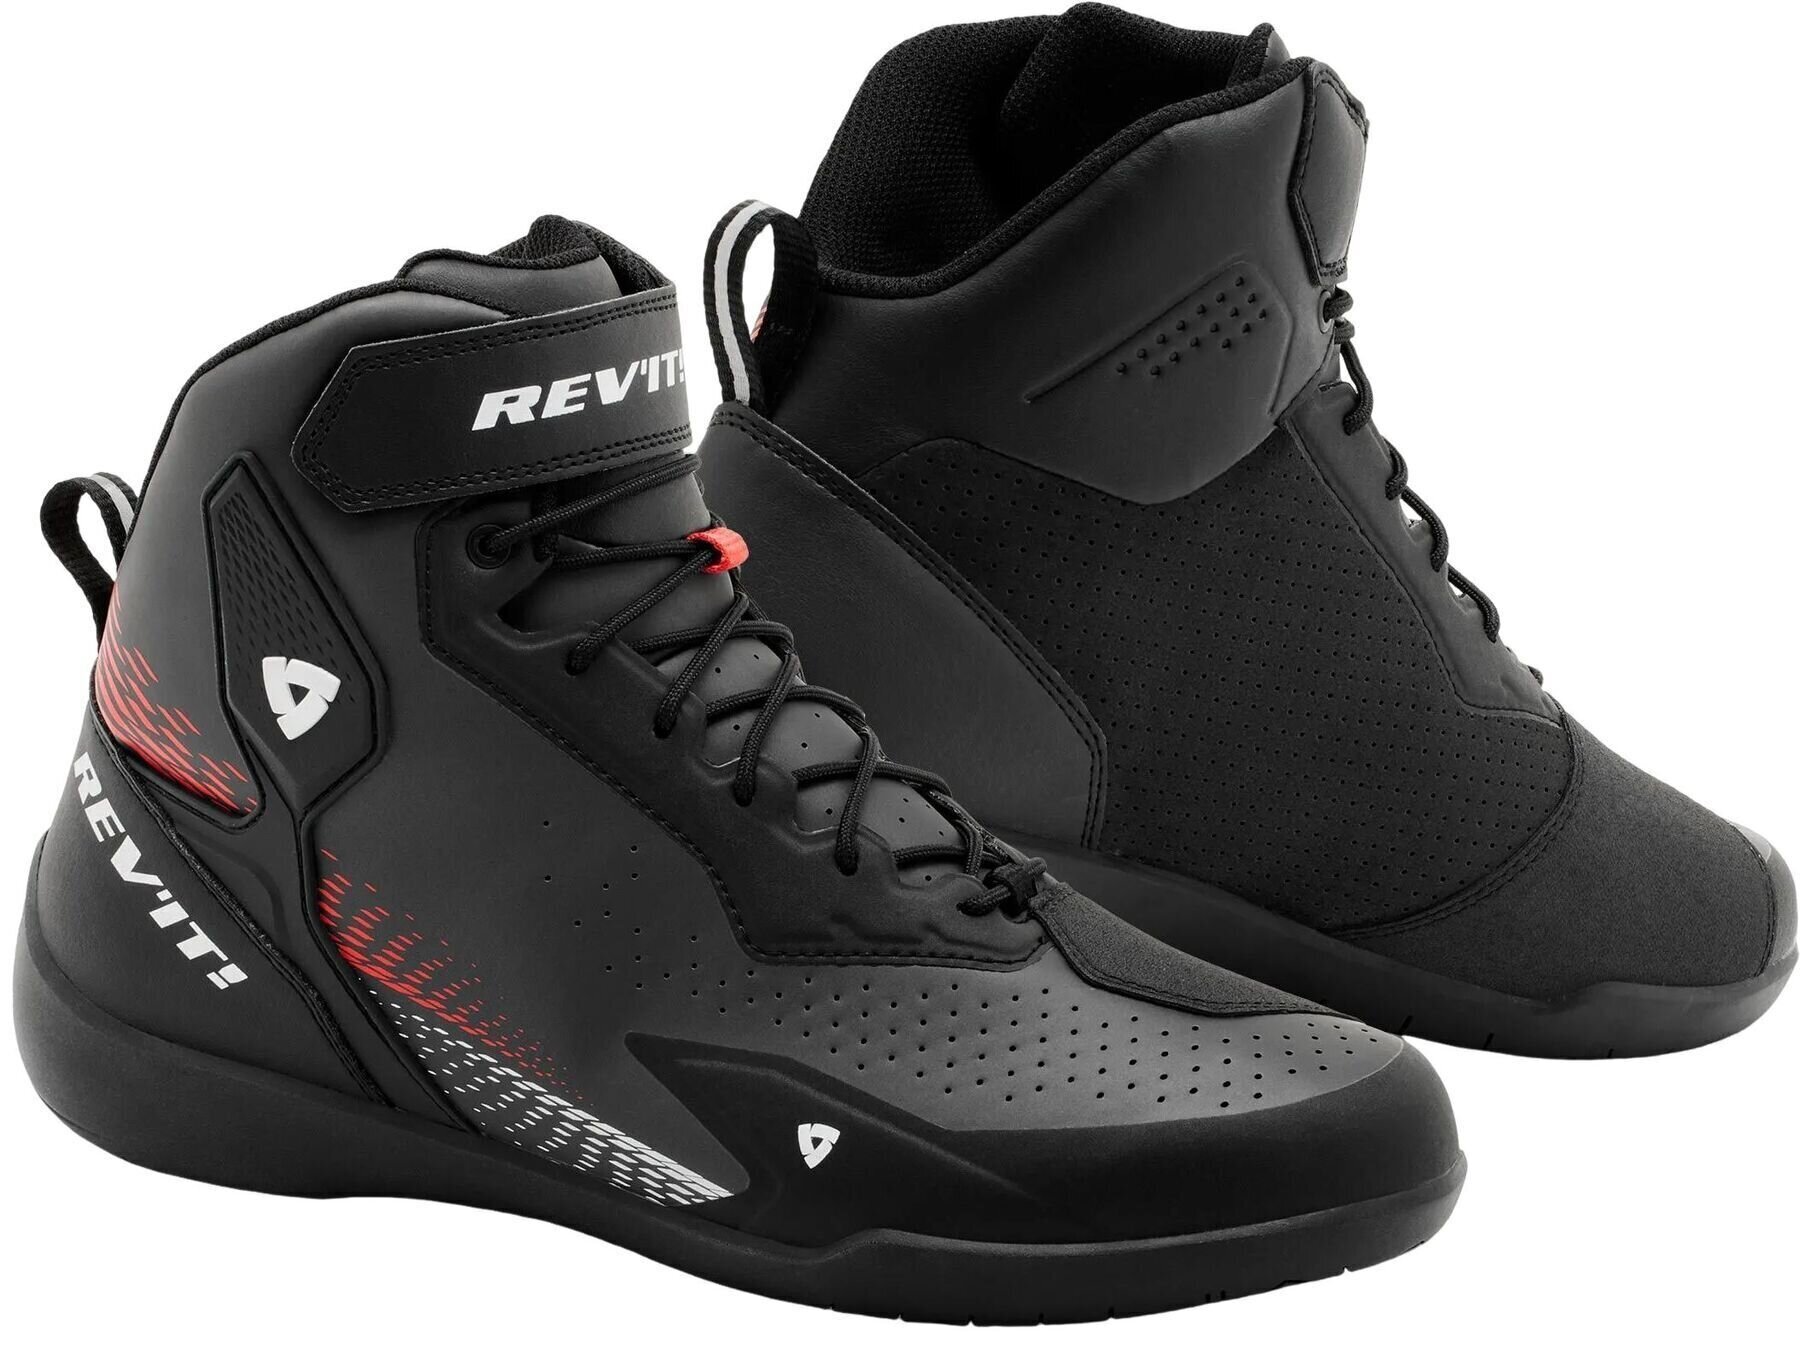 Motorcycle Boots Rev'it! Shoes G-Force 2 Black/Neon Red 43 Motorcycle Boots